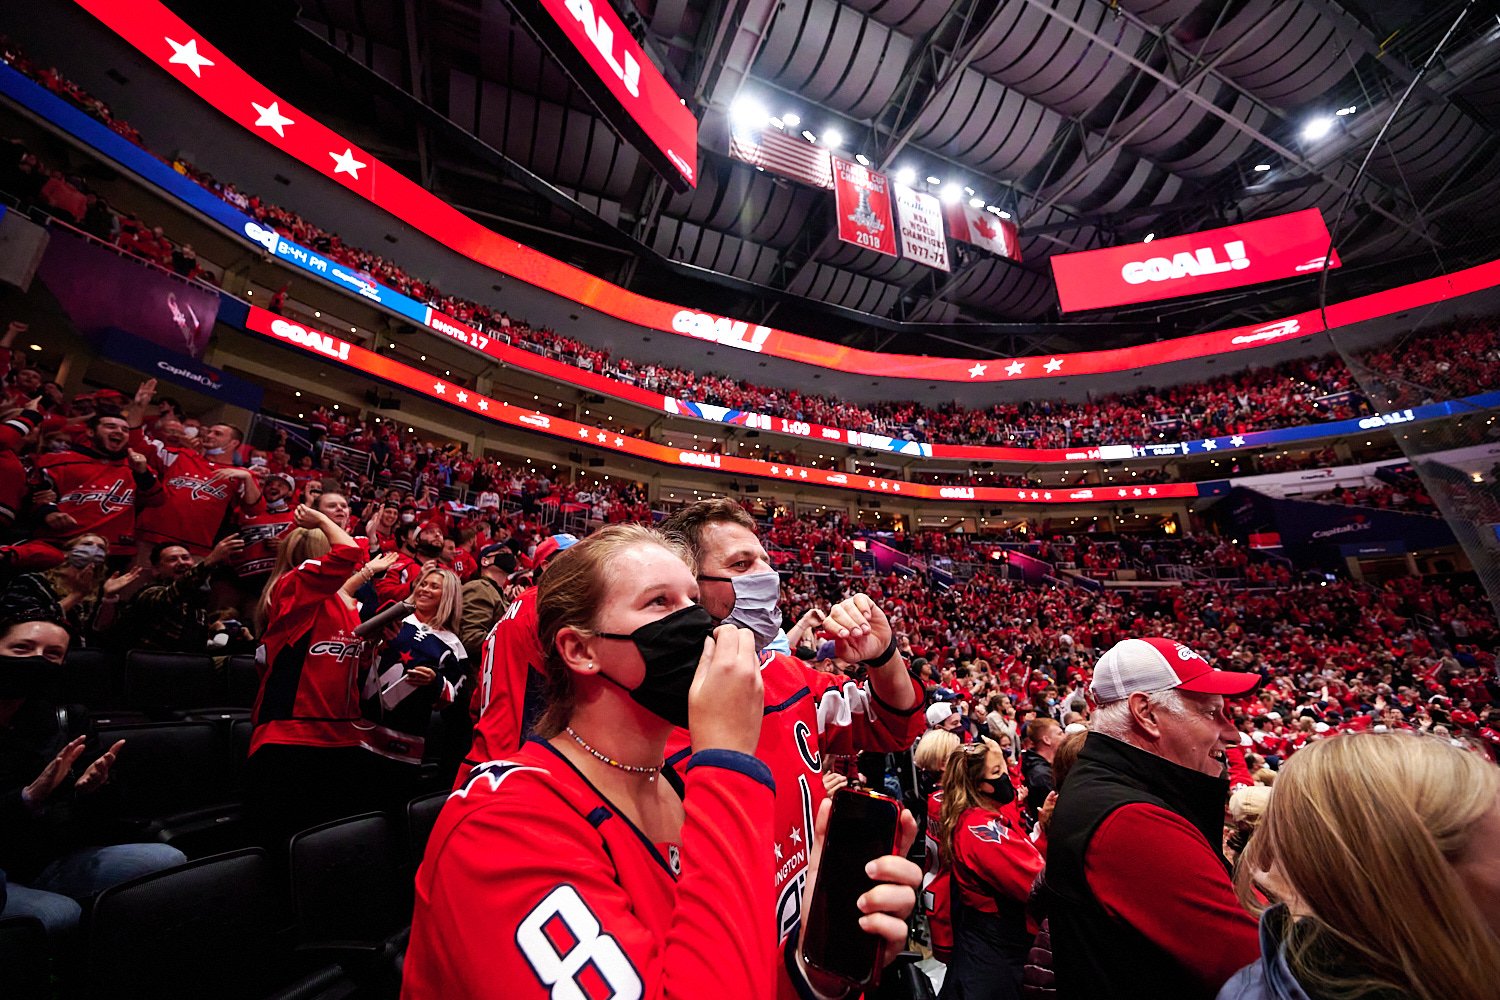  WASHINGTON, DC, USA - OCTOBER 16TH 2021: a National Hockey League team Washington Capitals play Tampa Bay Lightning at Capital One Arena. Many fans are not wearing masks during COVID-19 pandemic. 